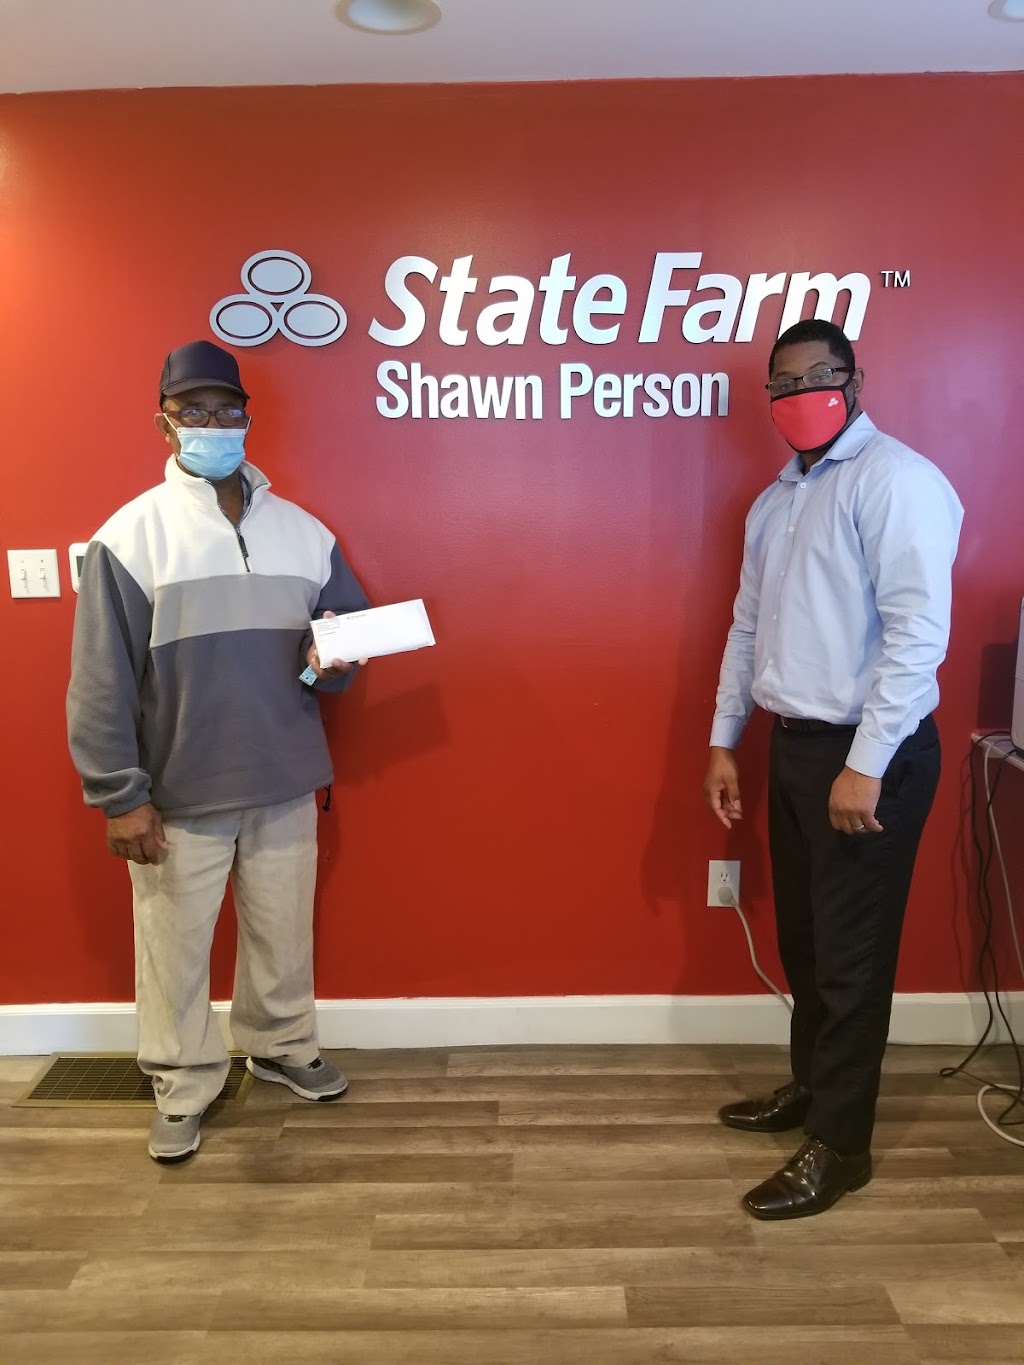 Shawn Person - State Farm Insurance Agent | 110 W Eagle Rd, Havertown, PA 19083 | Phone: (610) 536-6338